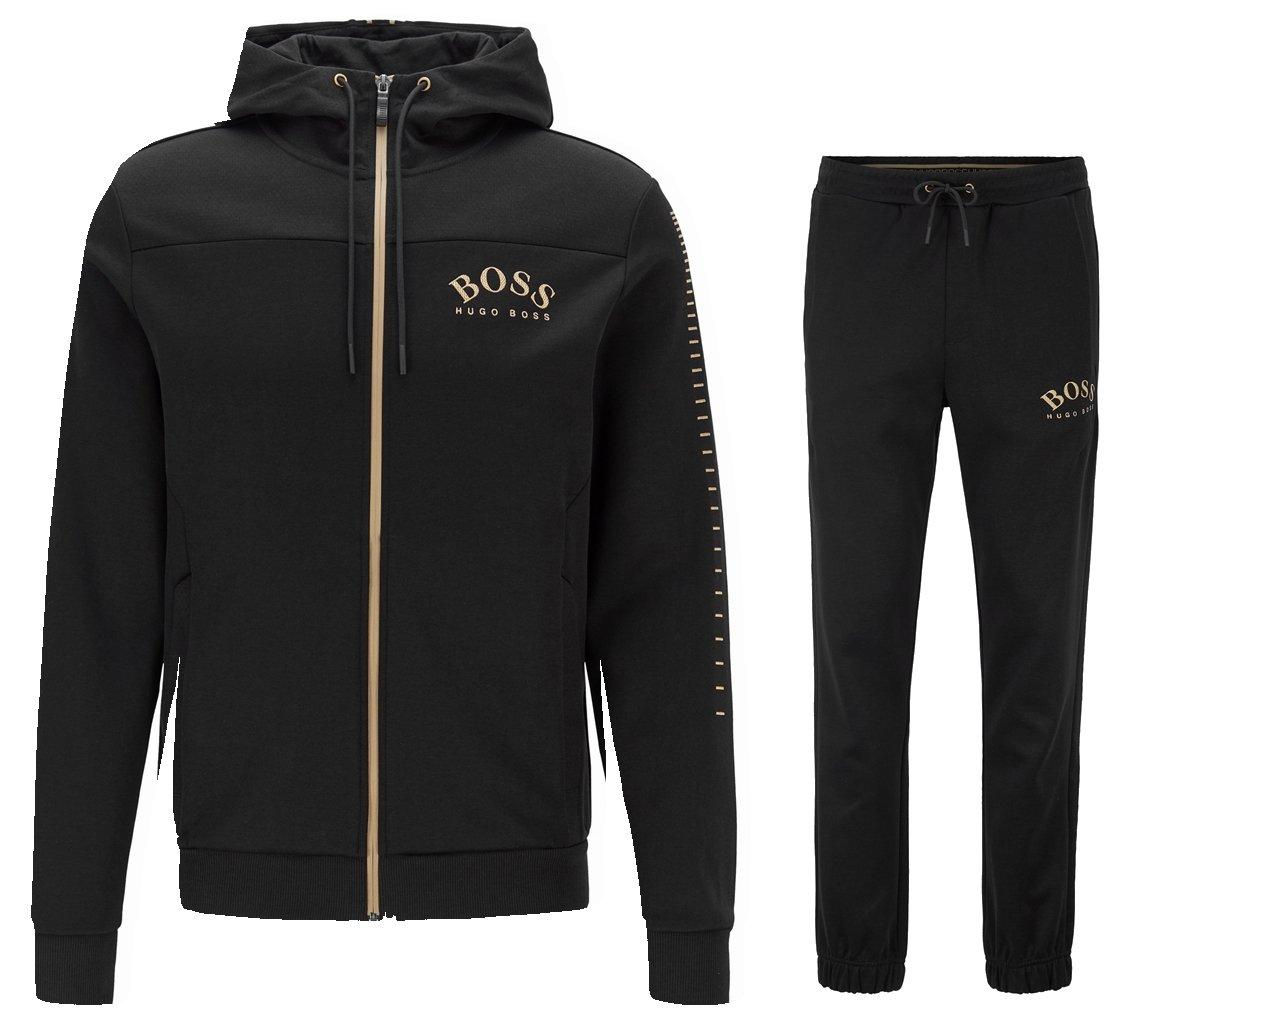 hugo boss tracksuit xs Cheaper Than Retail Price\u003e Buy Clothing, Accessories  and lifestyle products for women \u0026 men -